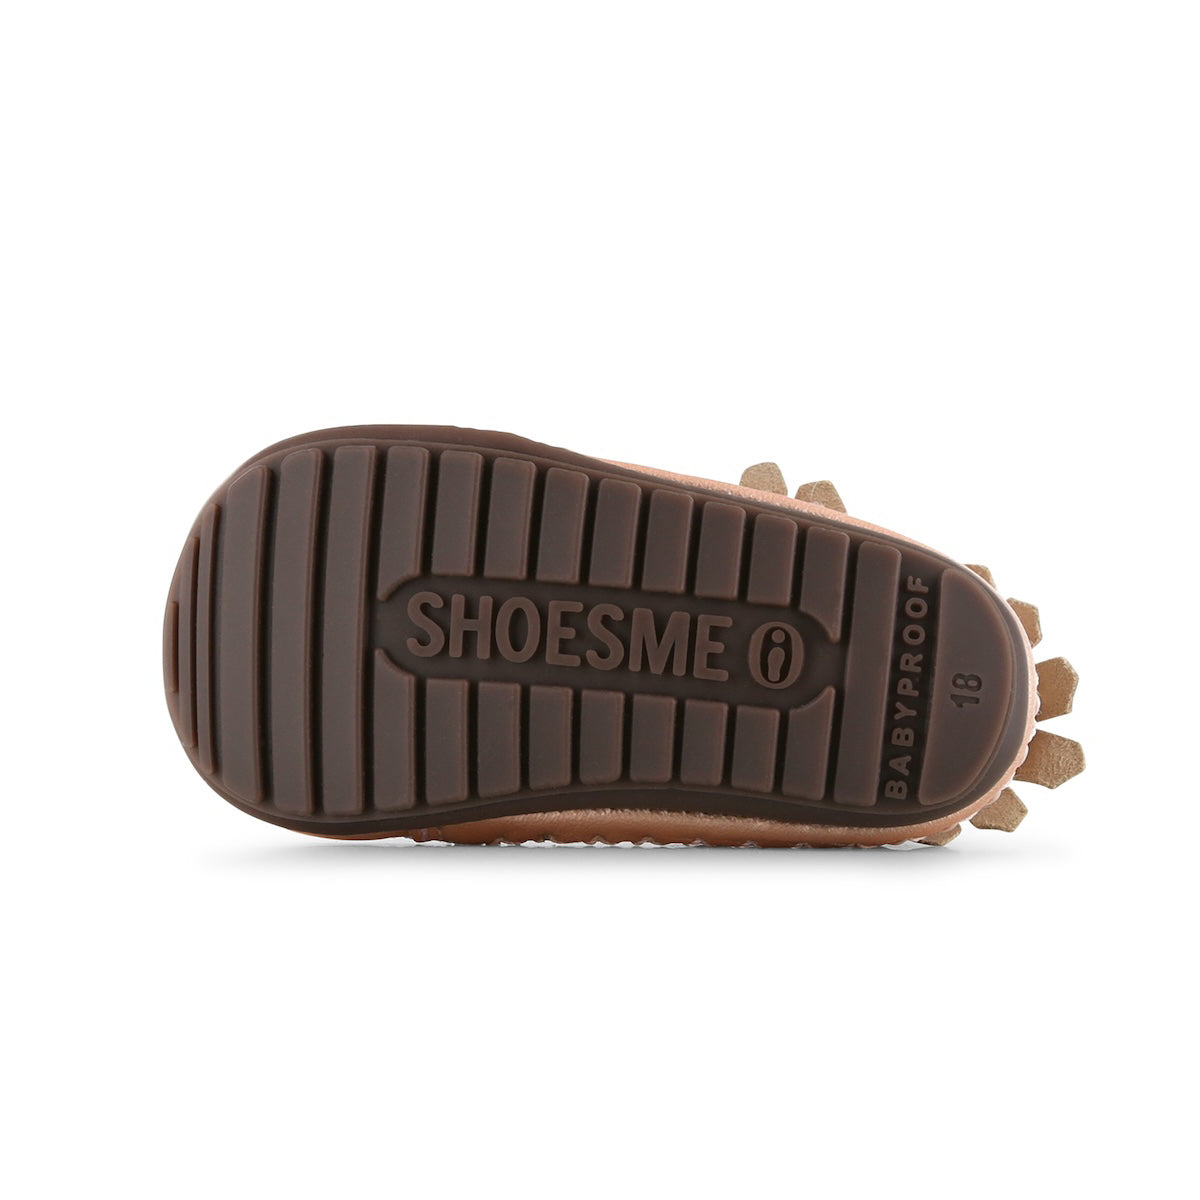 Shoesme baby-proof smart rose gold